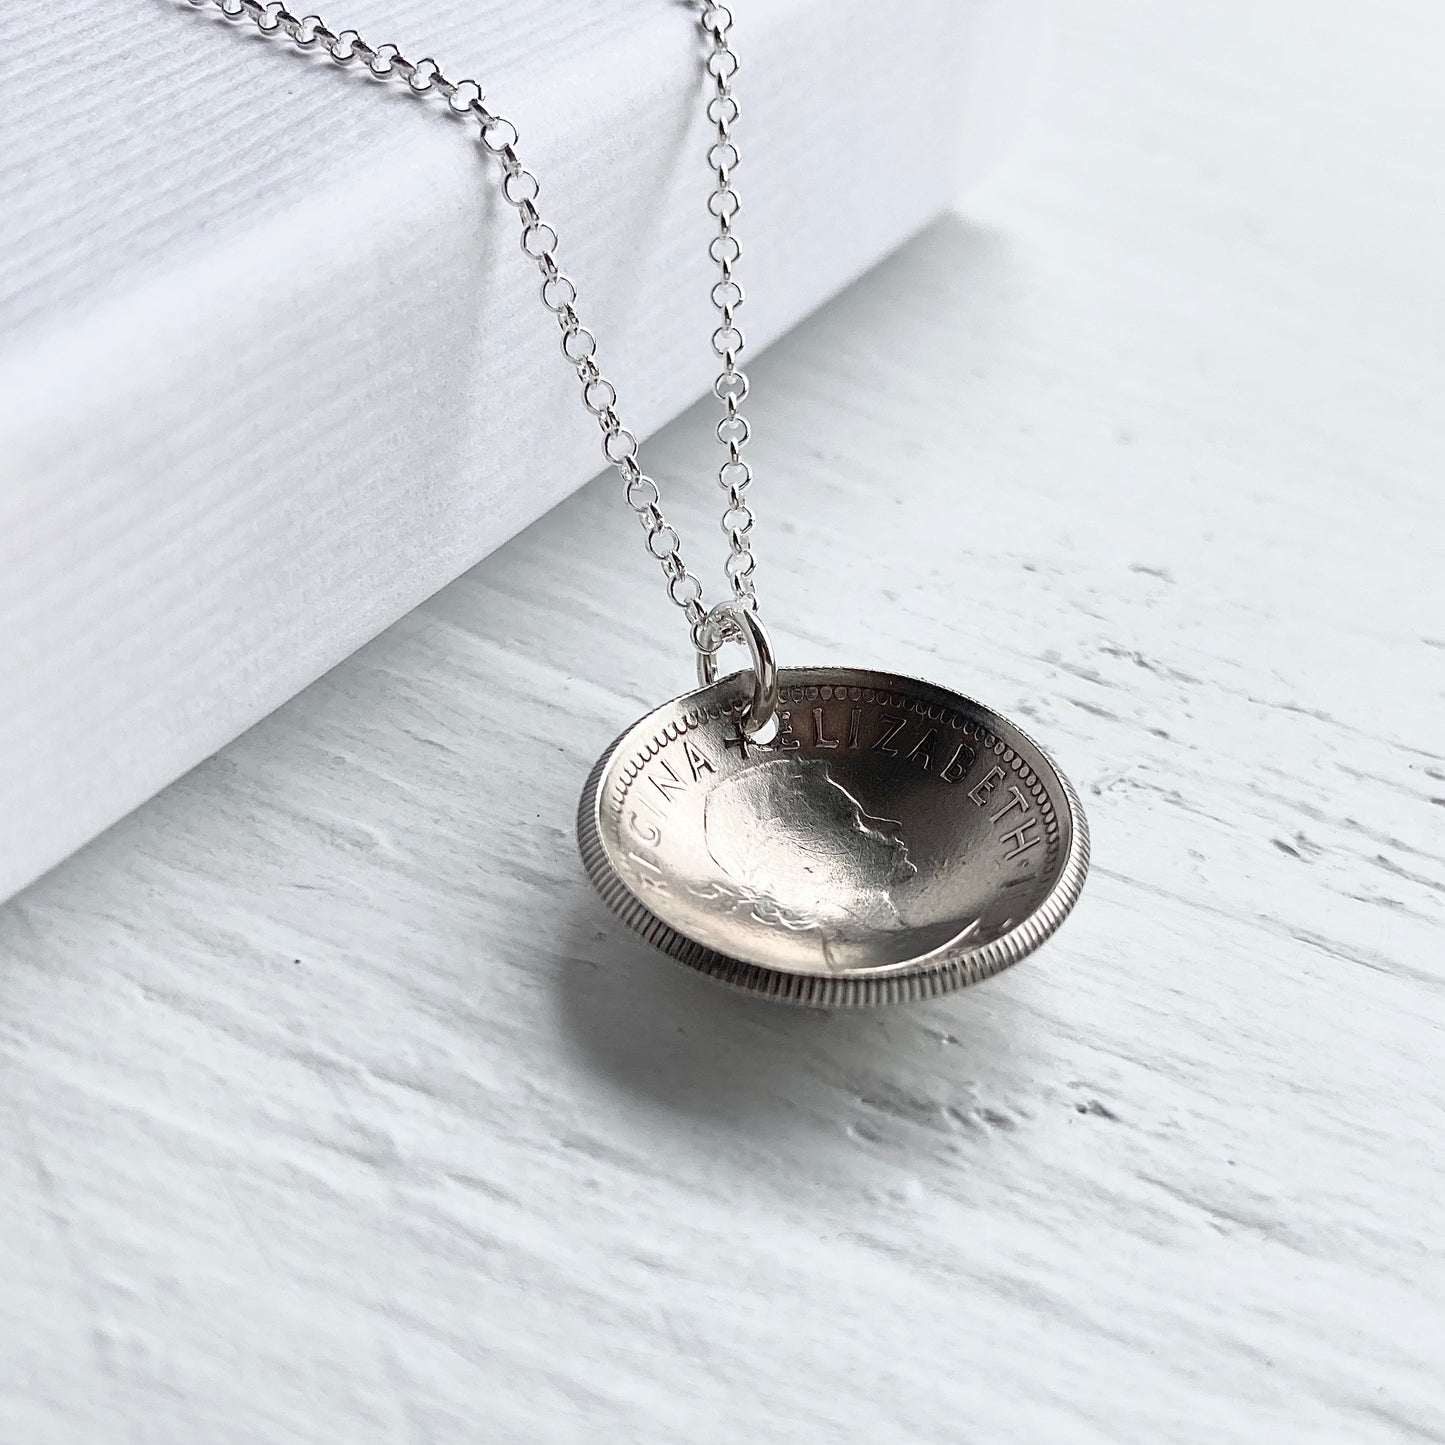 The Christmas Domed Sixpence Necklace